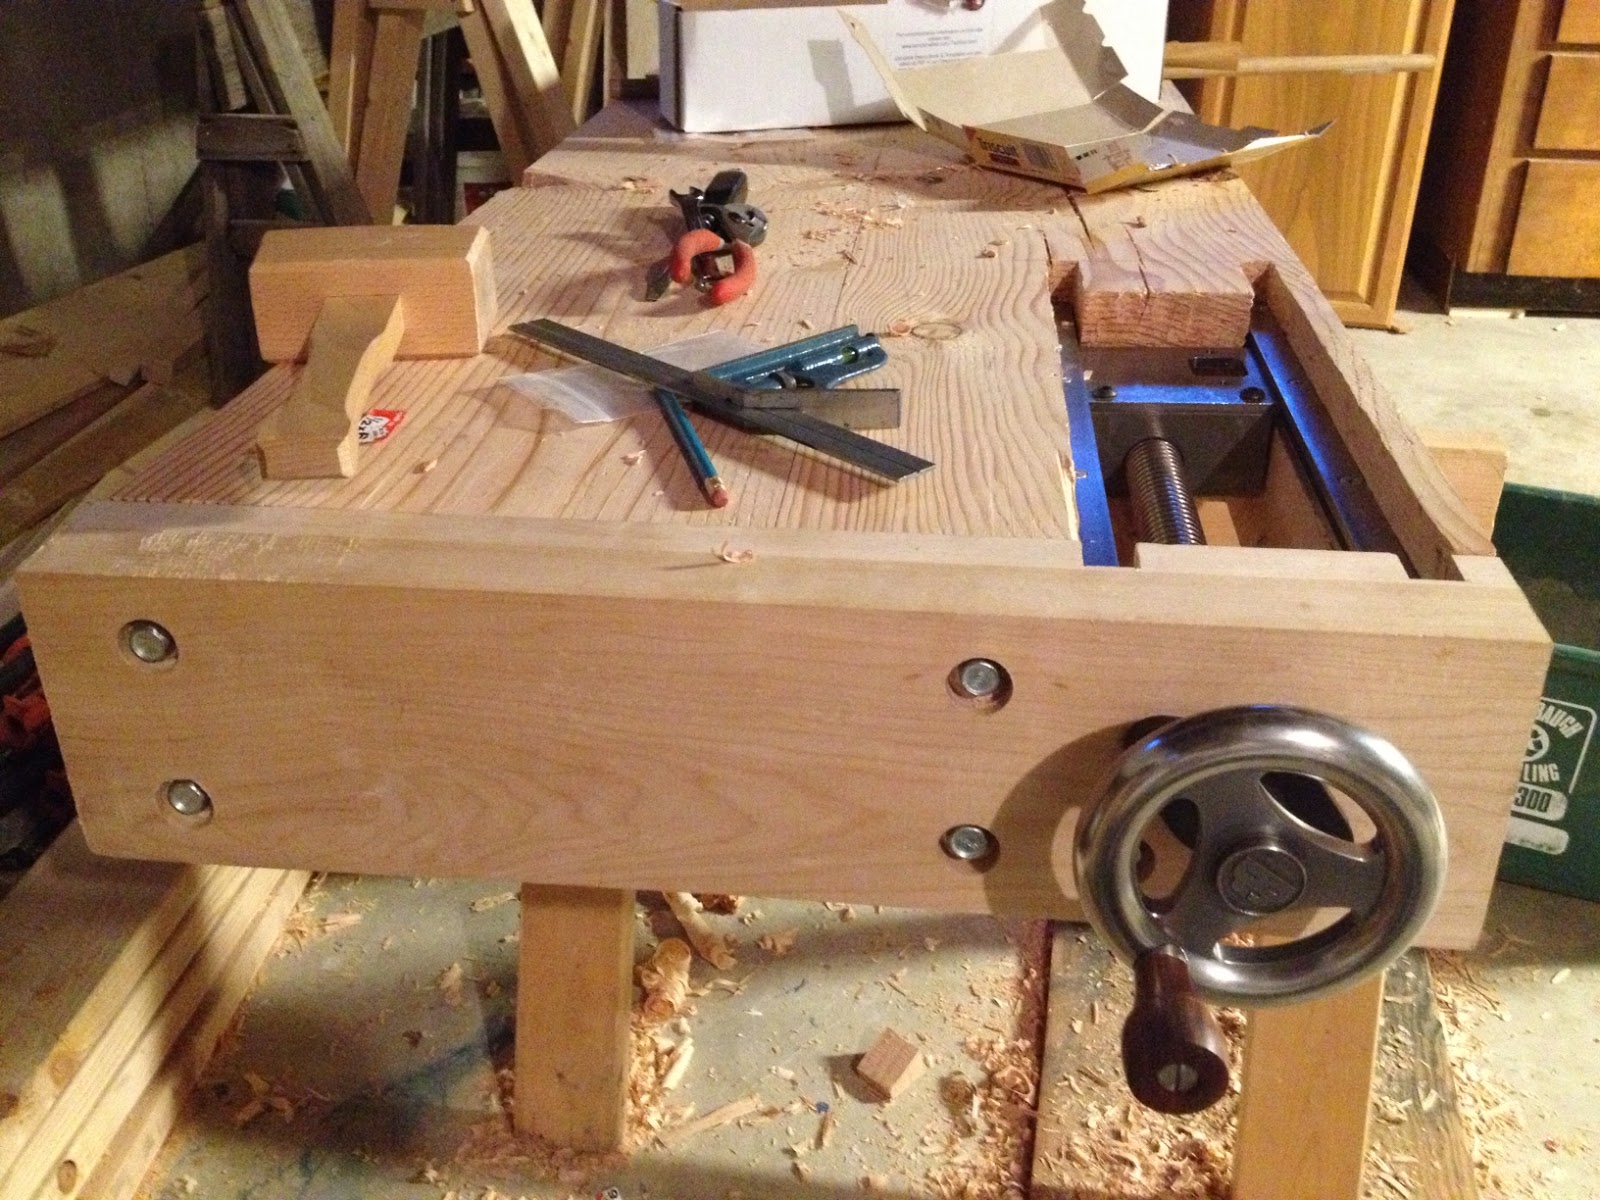 The Naptime Woodworker: Workbench - Tail Vise Installed